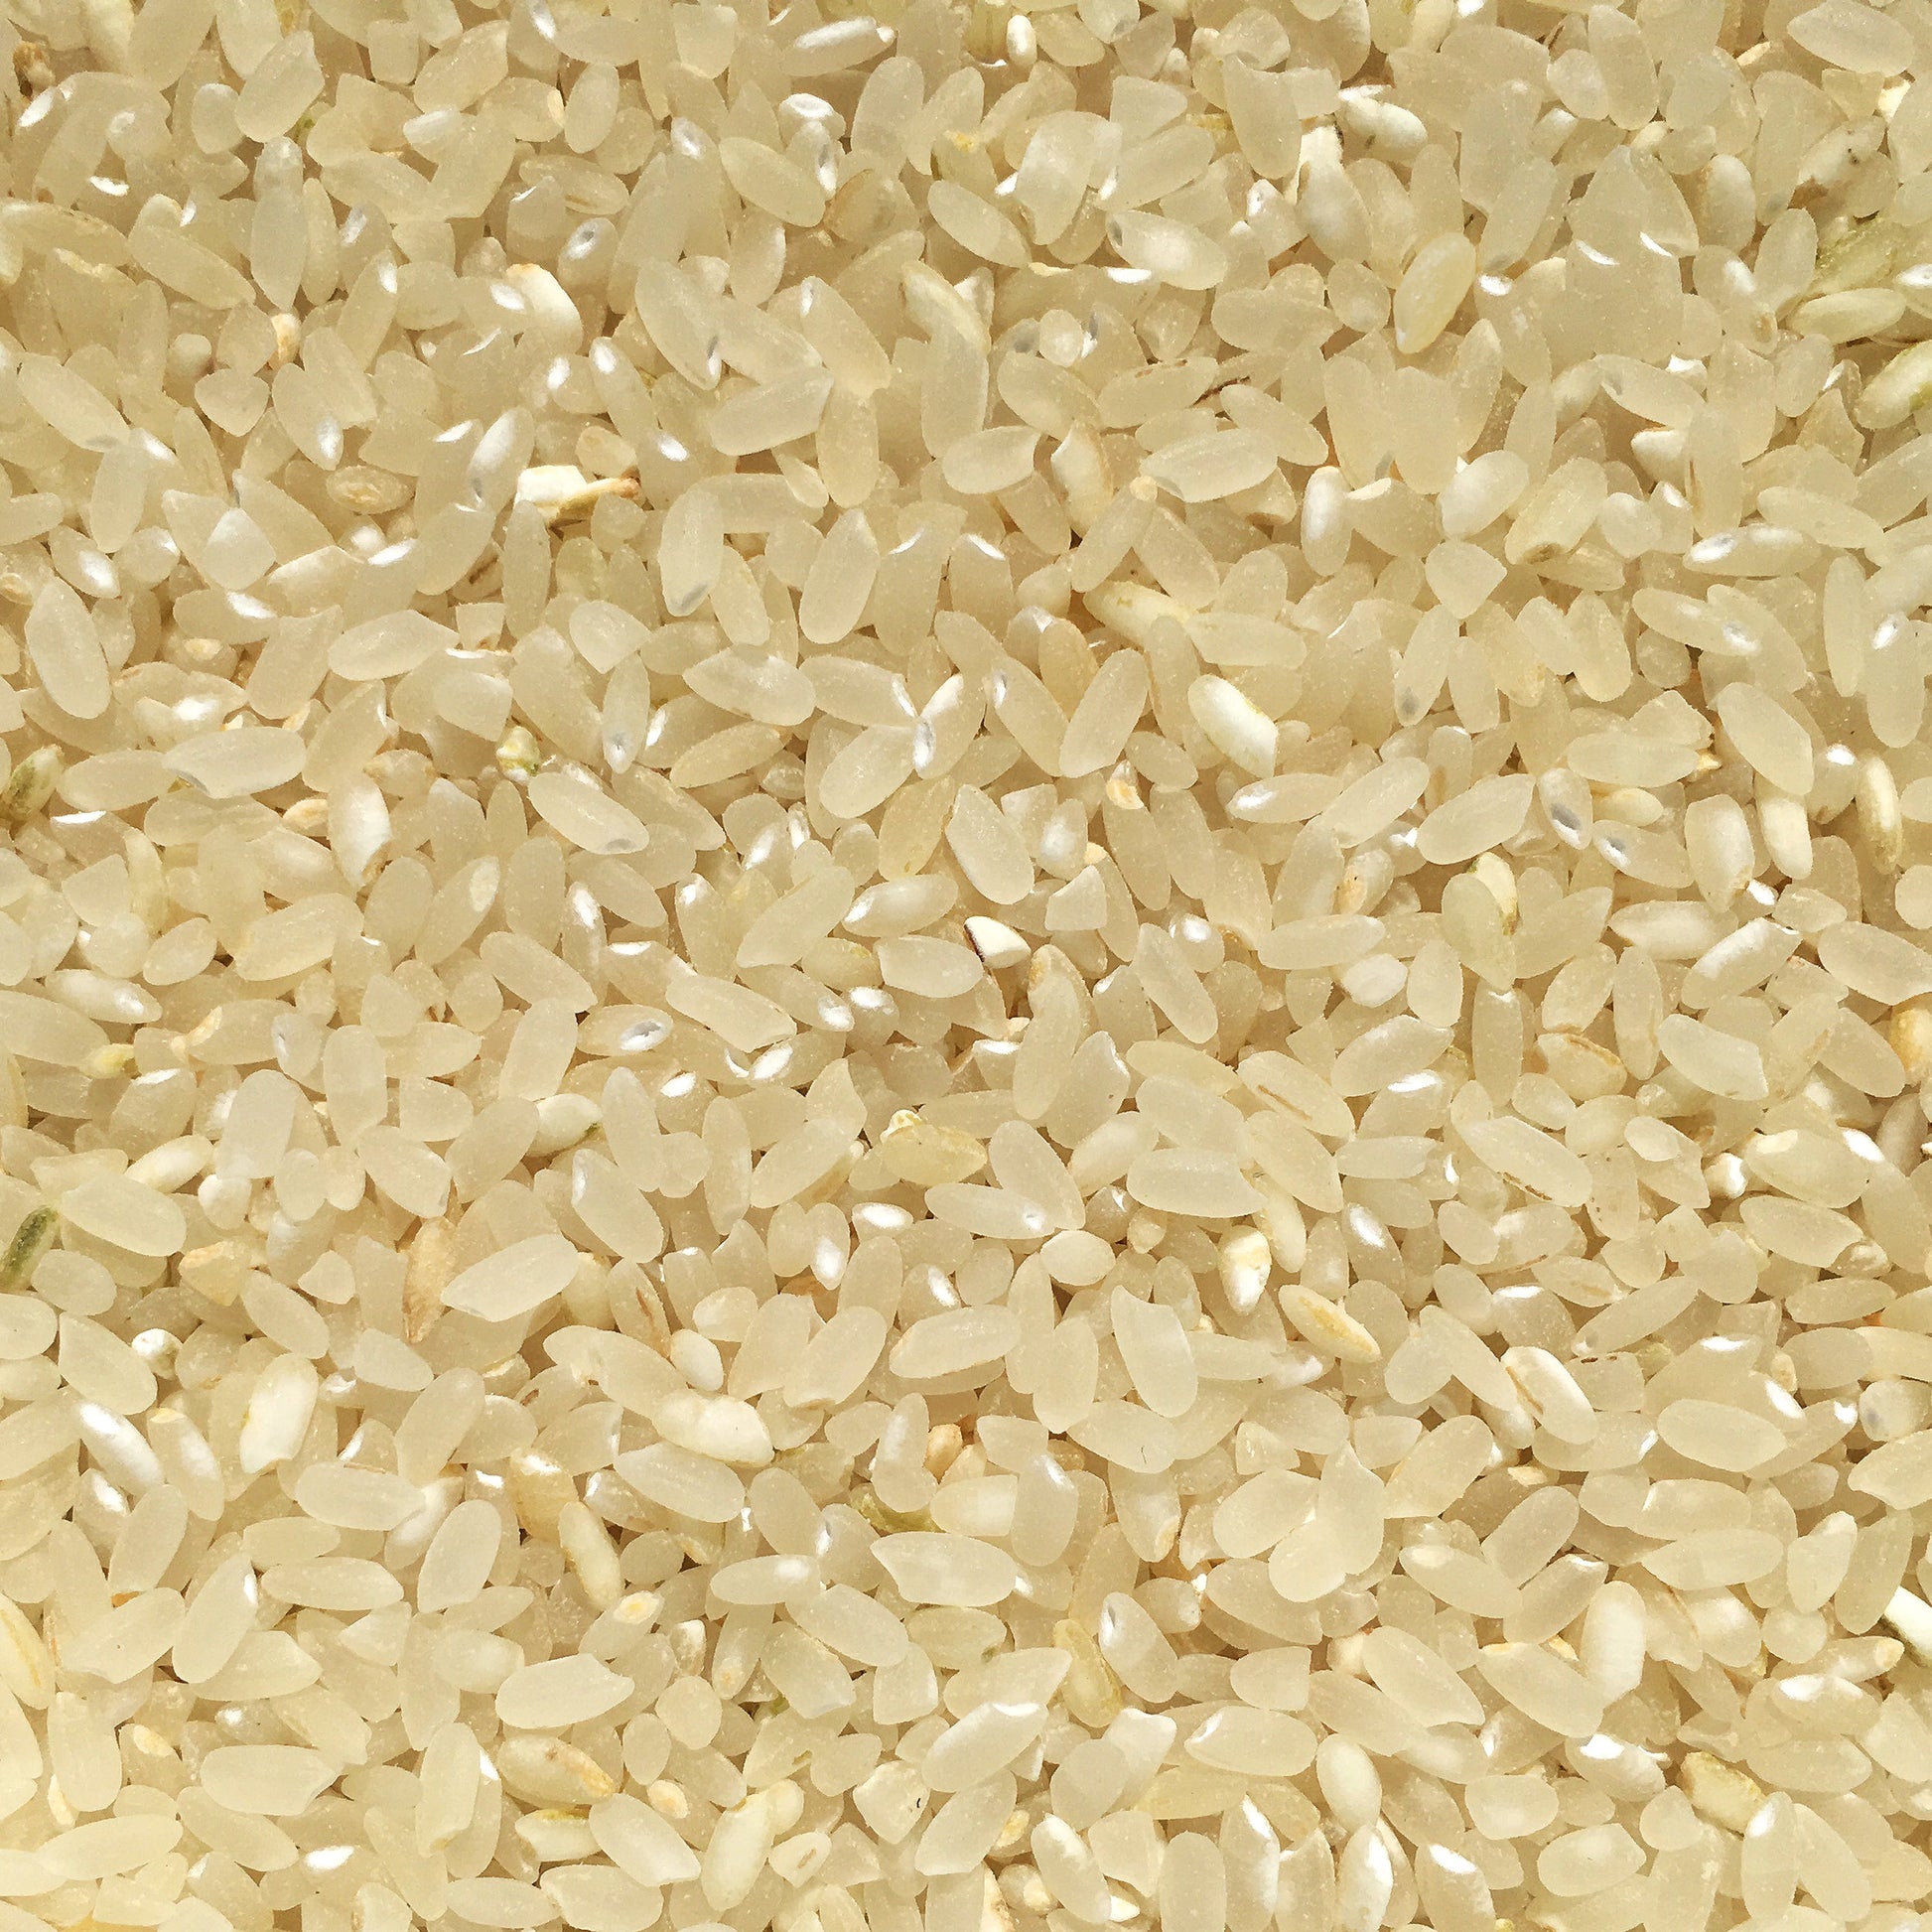 Chico Rice's Blonde Rice | Close Up of Blonde Rice